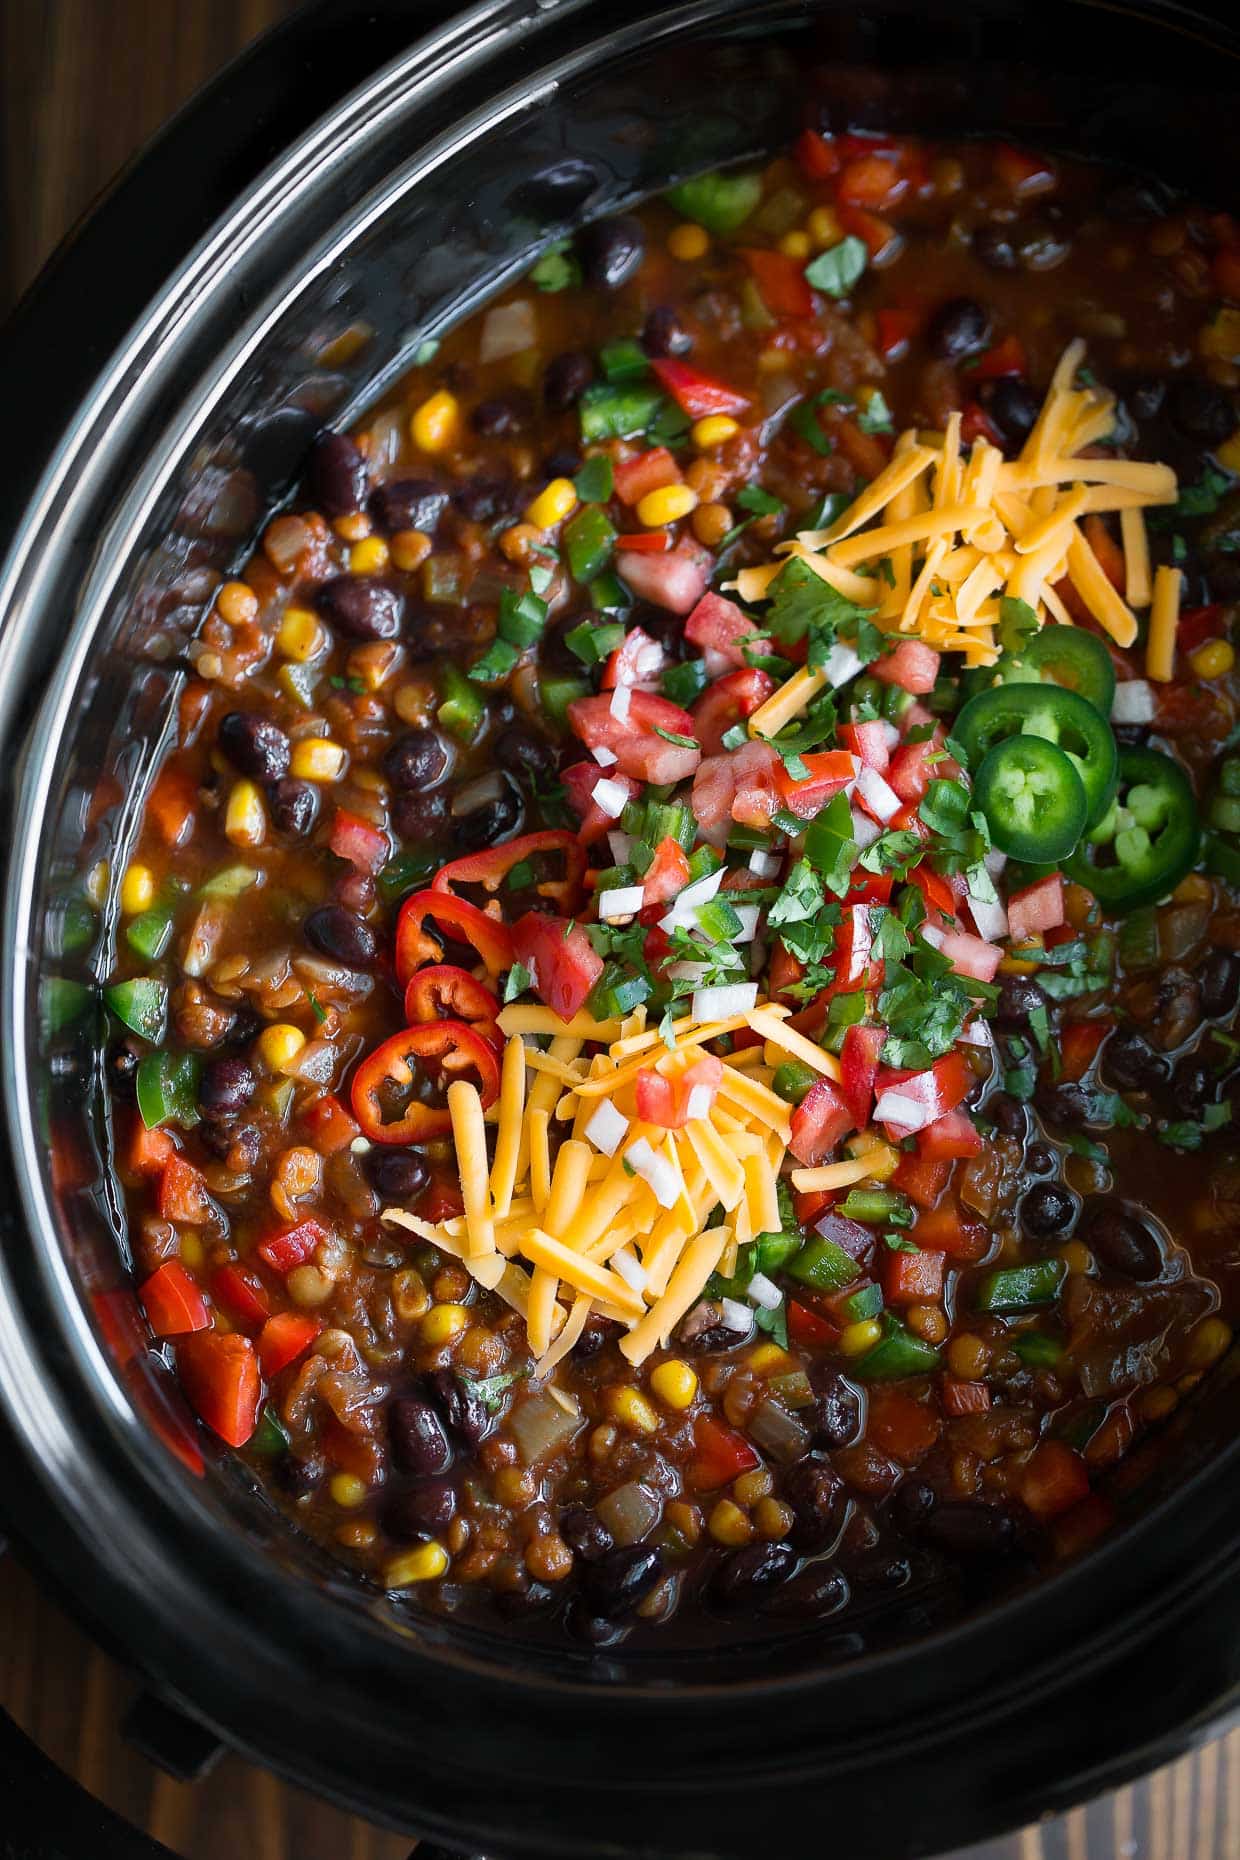 A crock pot full of chili and beans.